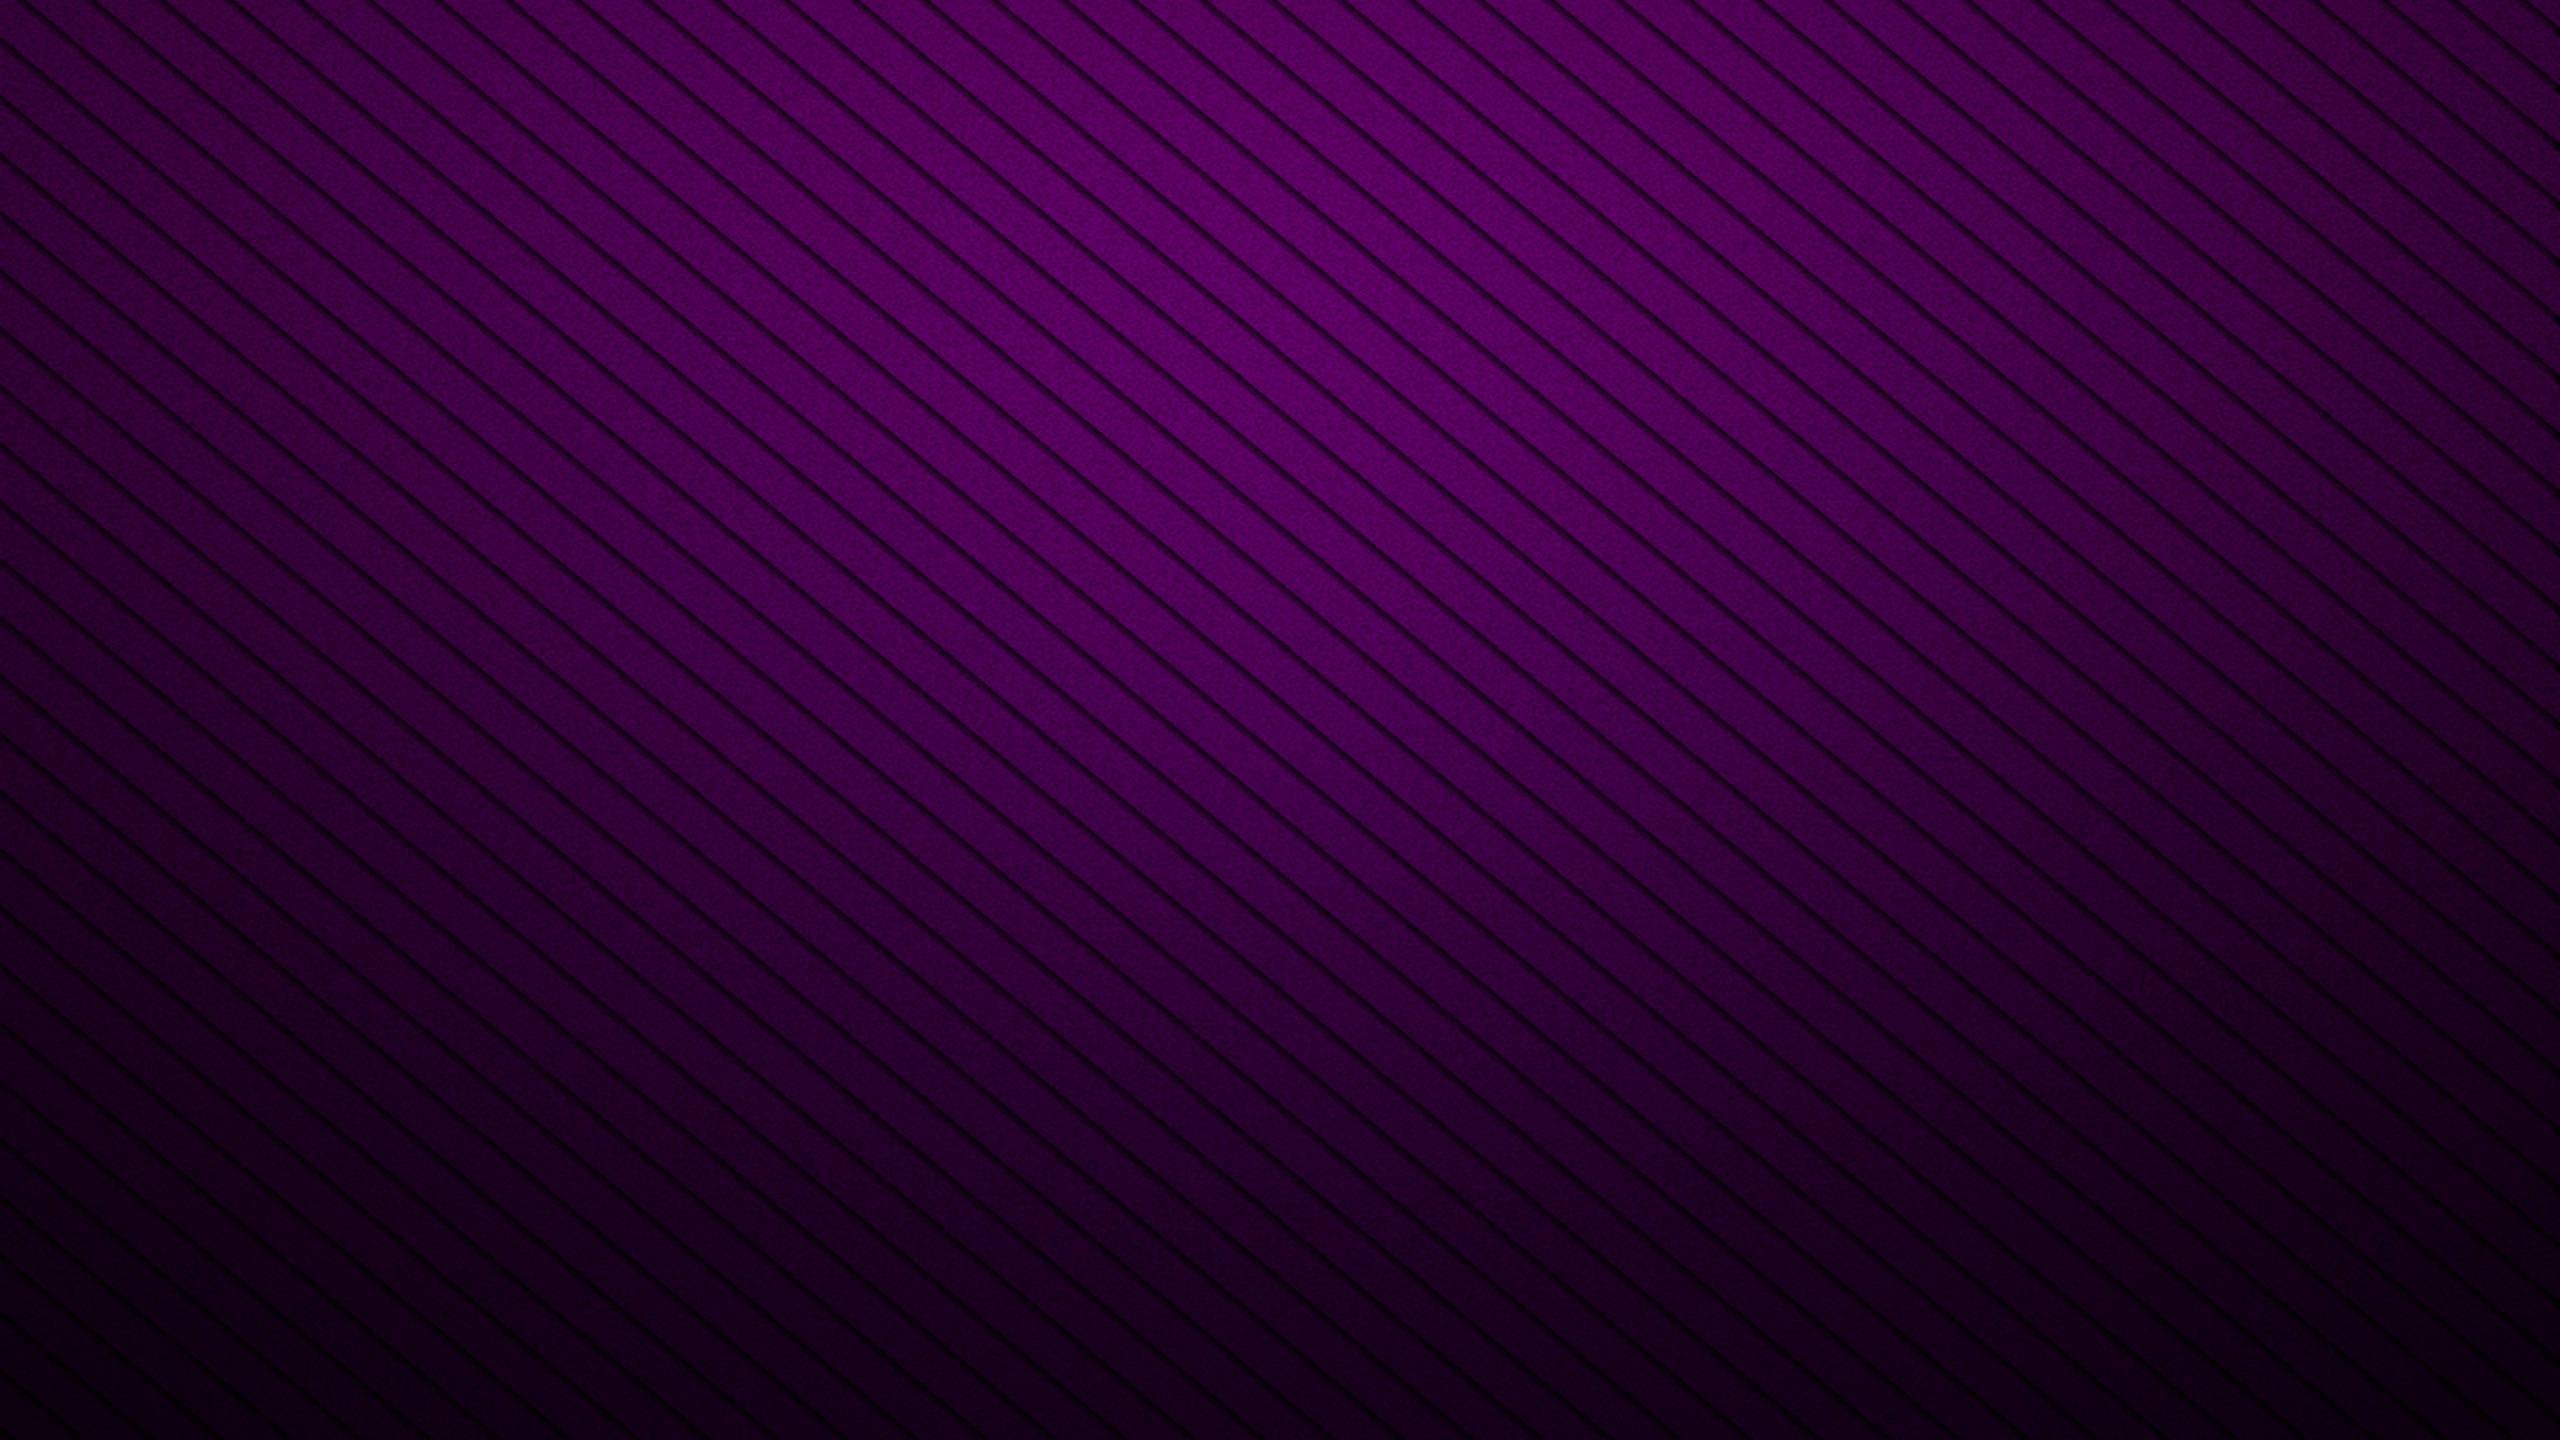 Purple And Black Texture Wallpaper HD Picture 62141 Label